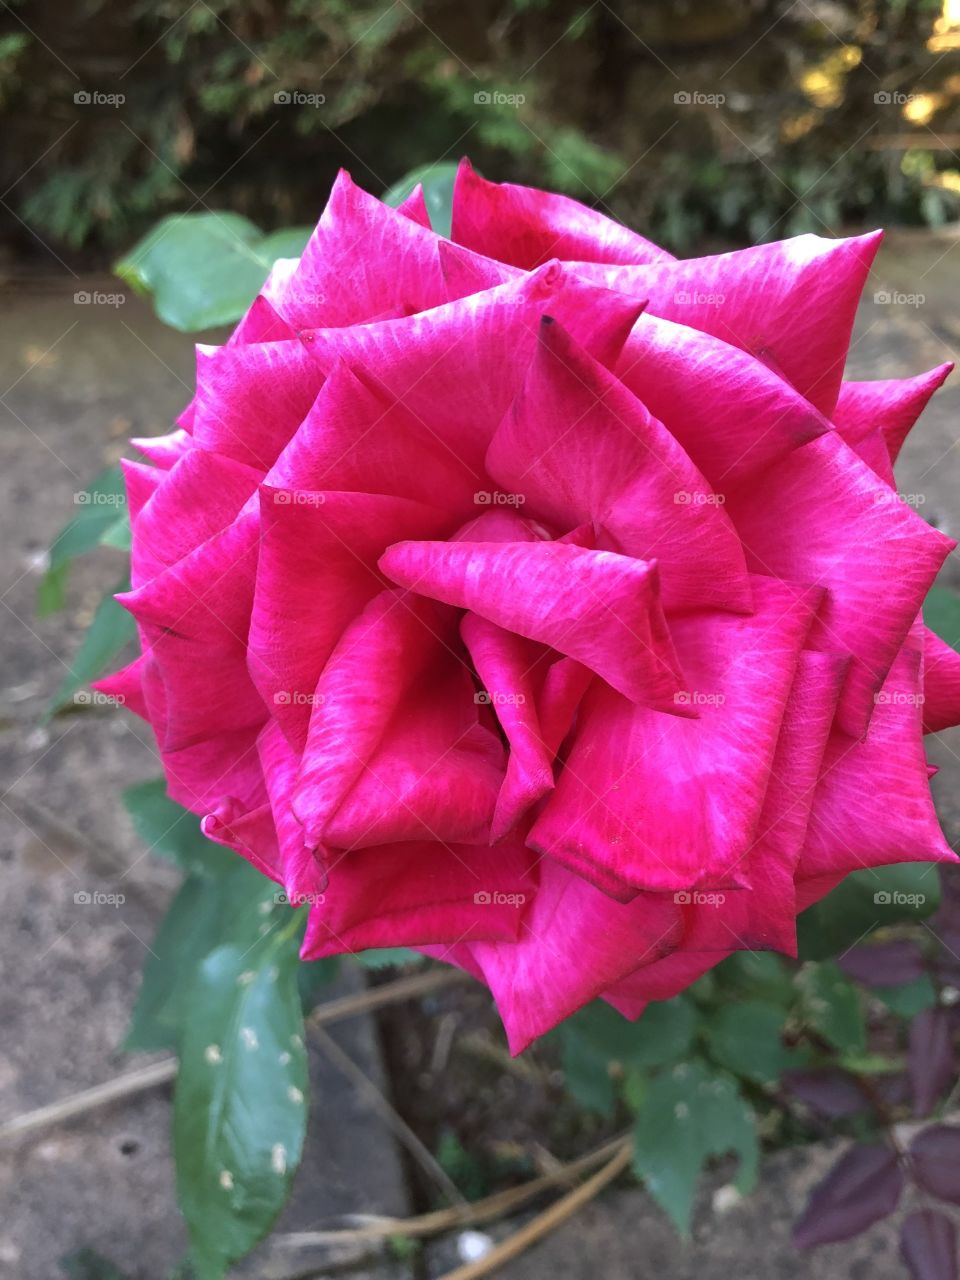 A deep pink rose, chosen for Anniversary Celebration amongst others, the strident color is stunning.